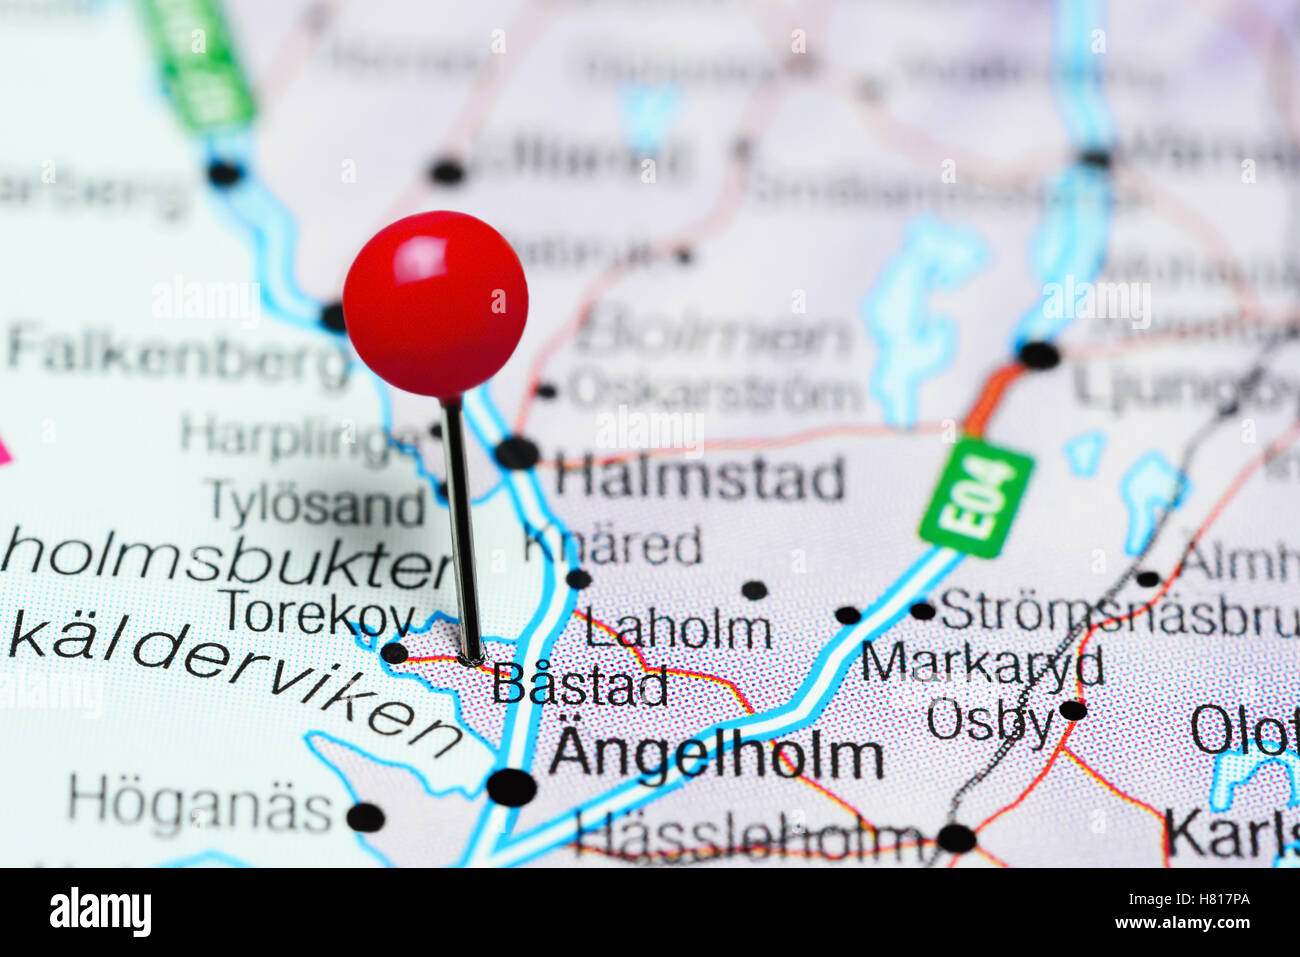 Bastad pinned on a map of Sweden Stock Photo